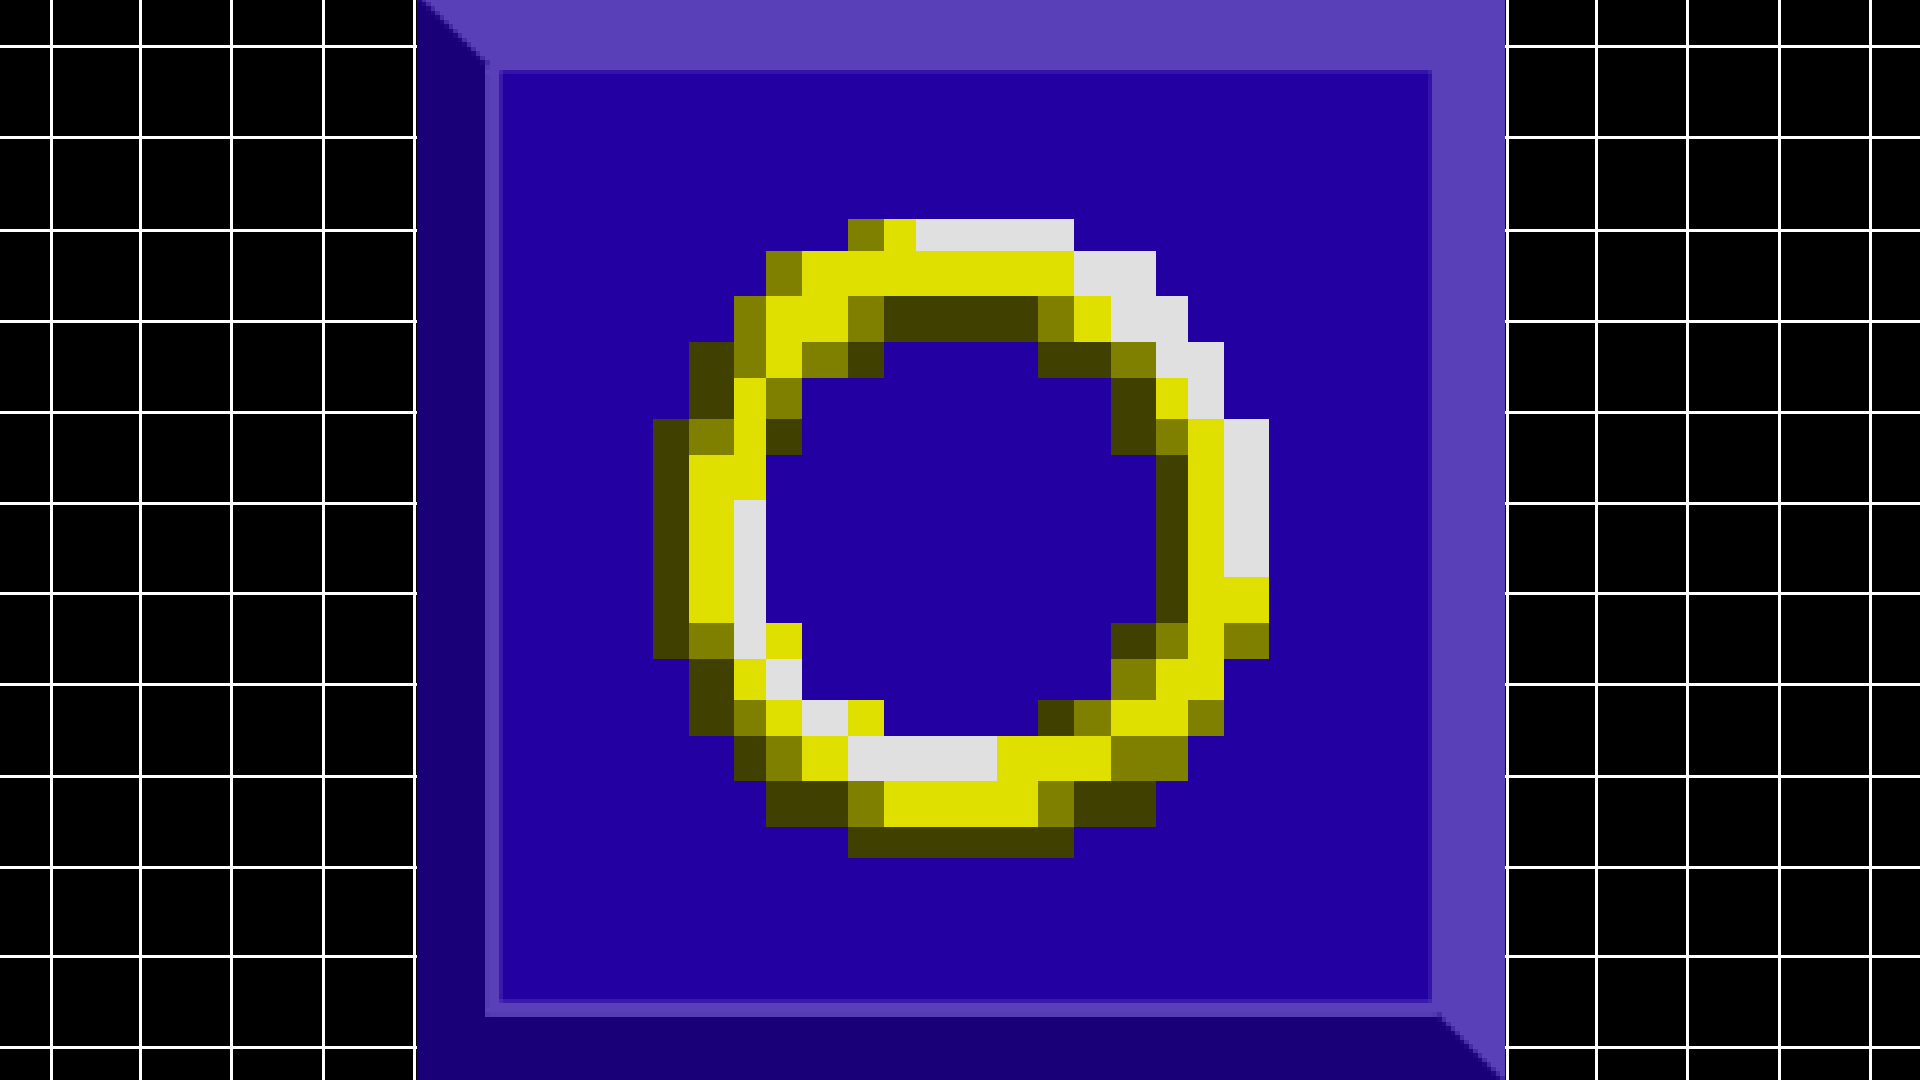 500 rings to rule them all